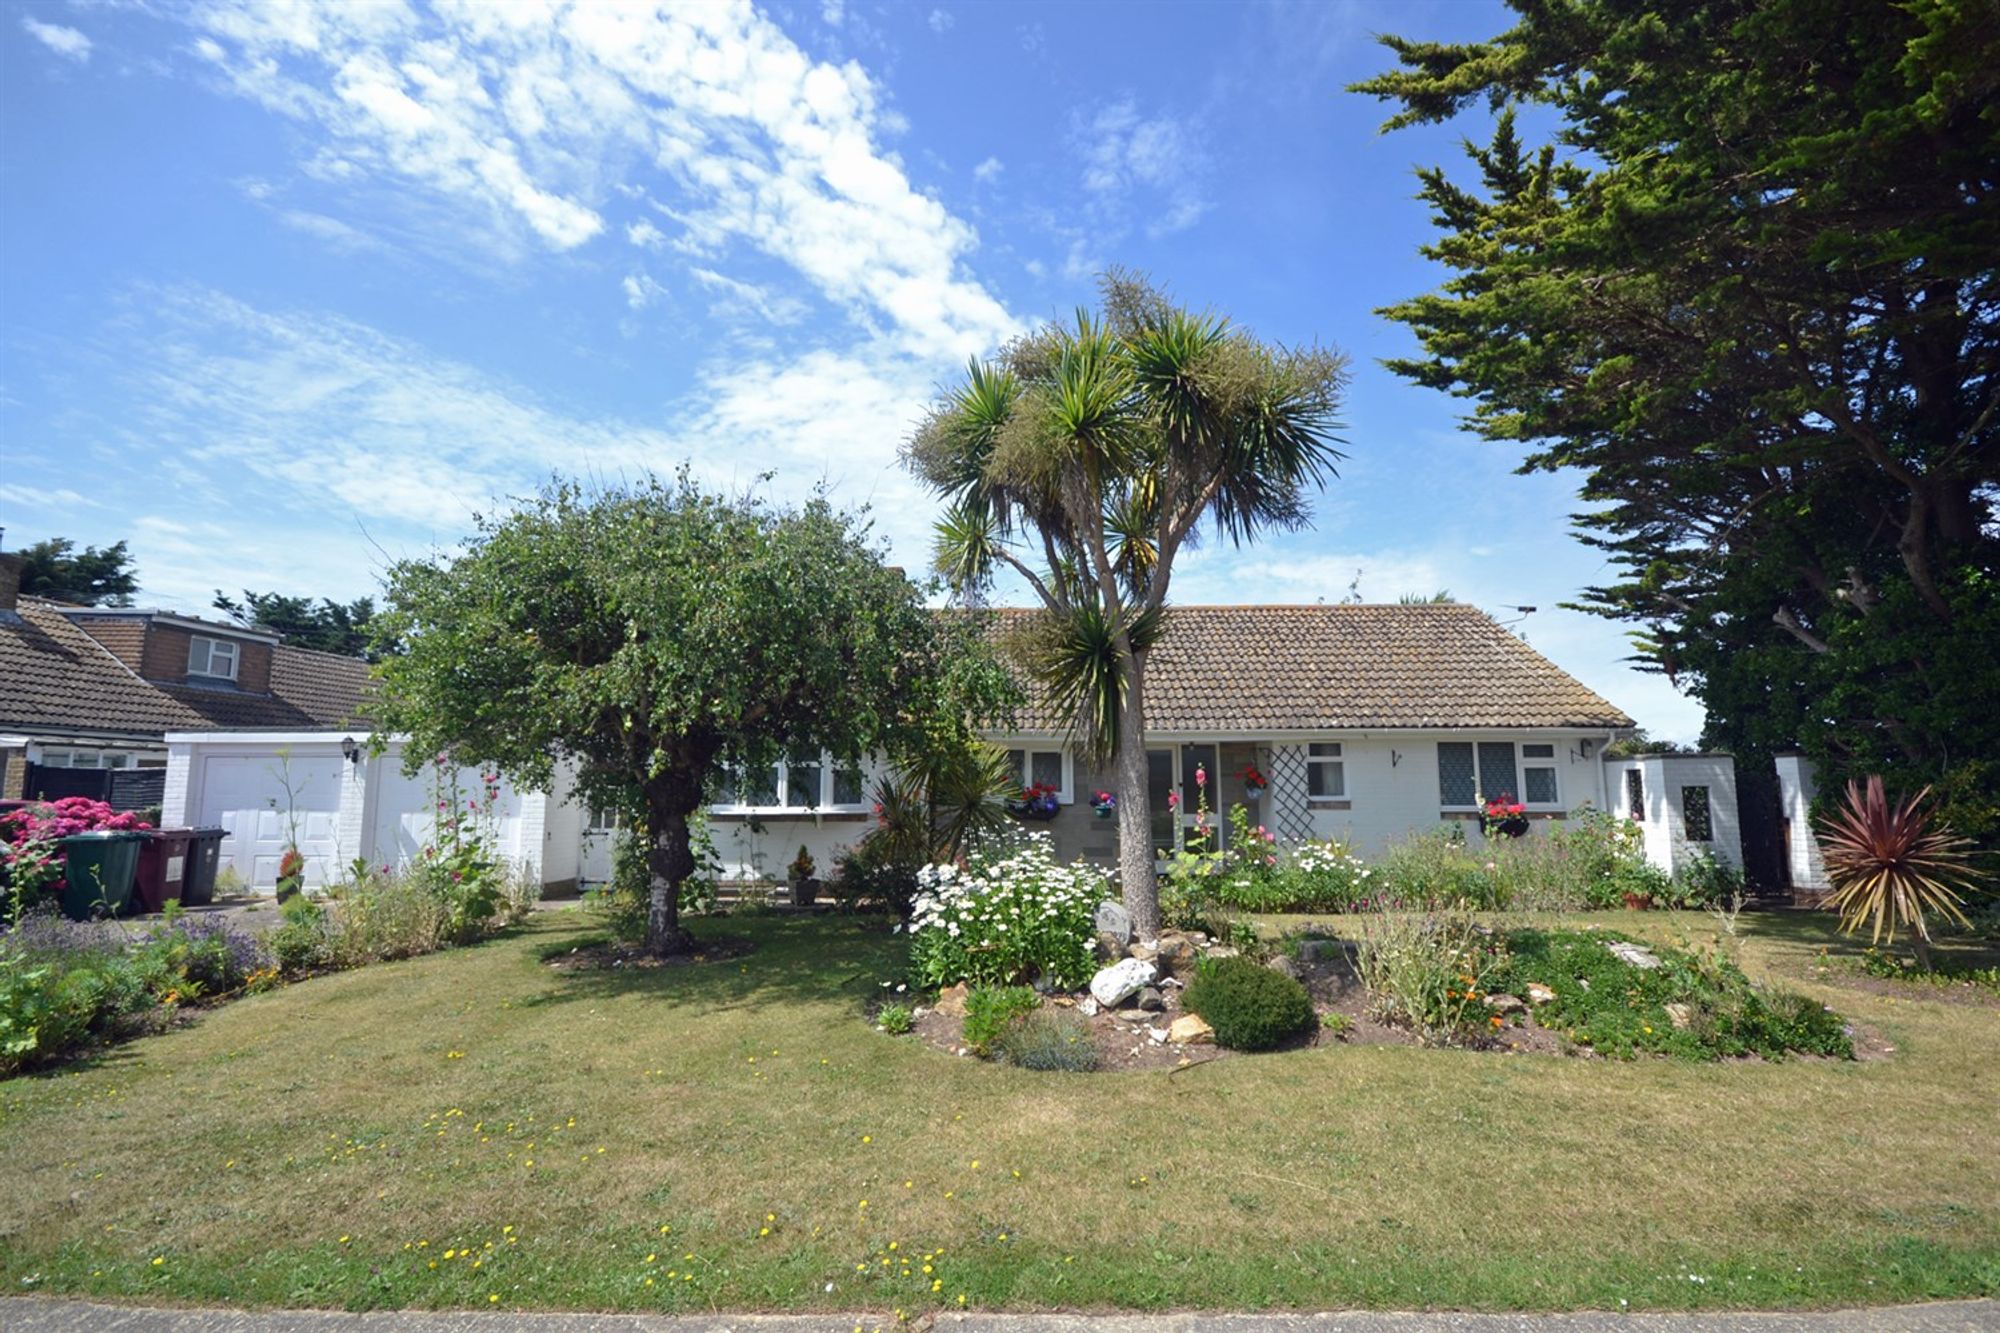 Hersee Way, Selsey, PO20